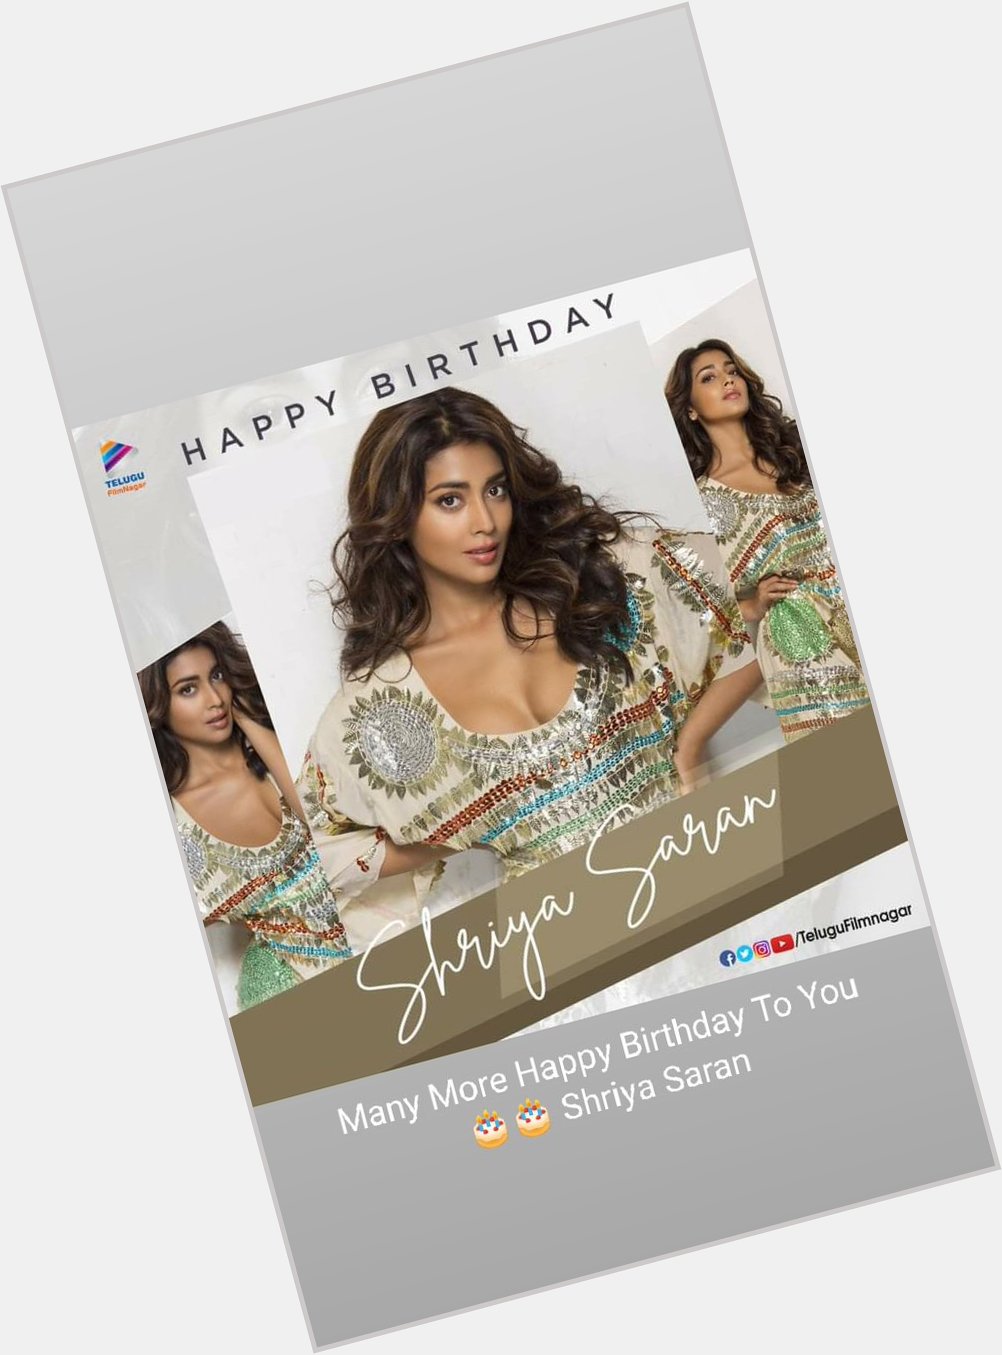 Many More Happy Birthday To You  Shriya Saran I\m your fane your movie s all see you very good acting 